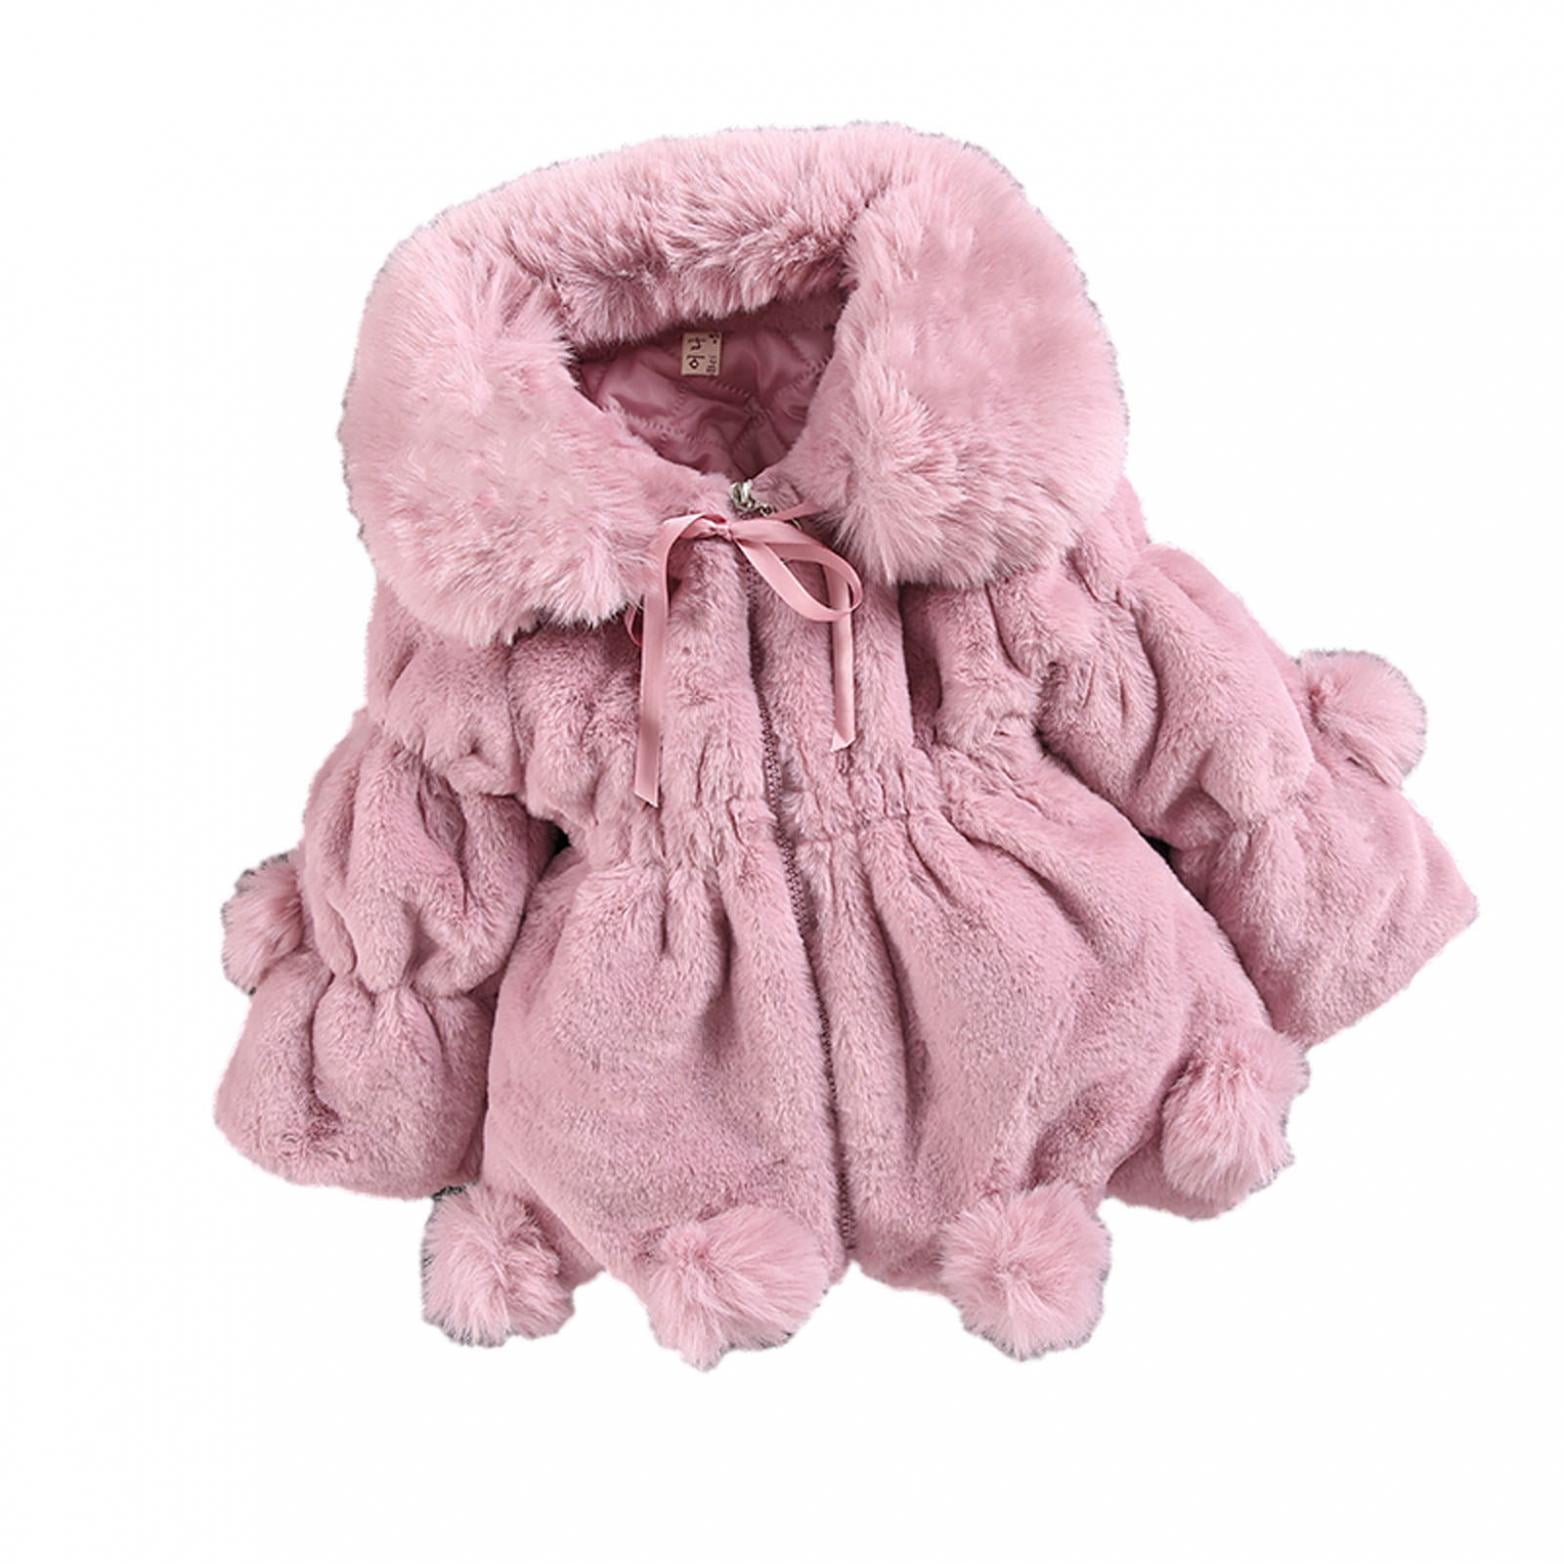 Toddler Kids Girl Baby Outerwear Faux Fur Hooded Winter Warm Coat Jacket Clothes 